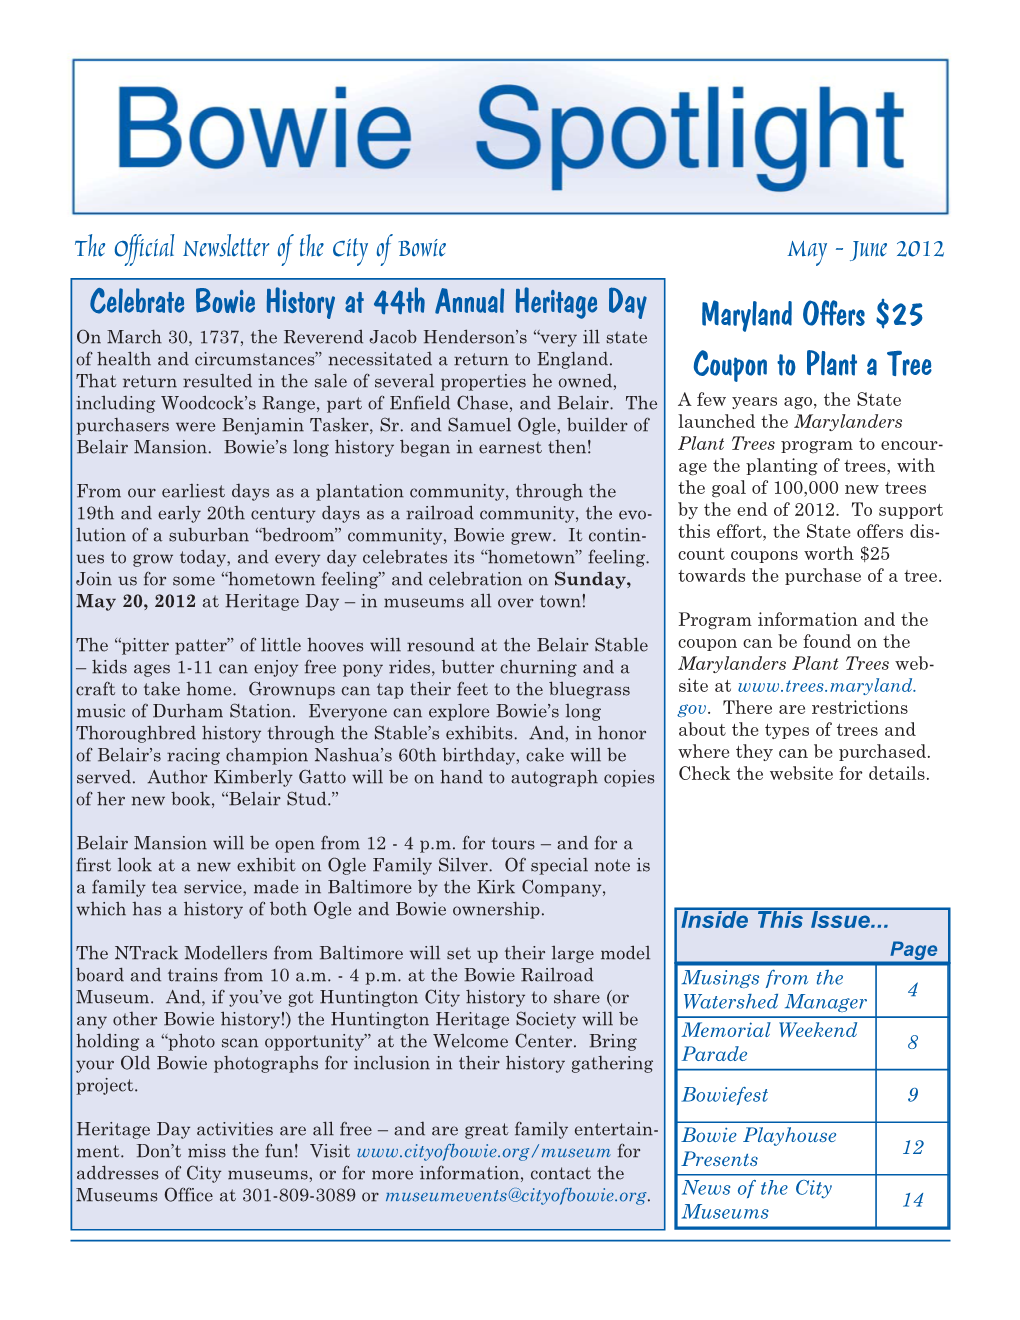 The Official Newsletter of the City of Bowie May - June 2012